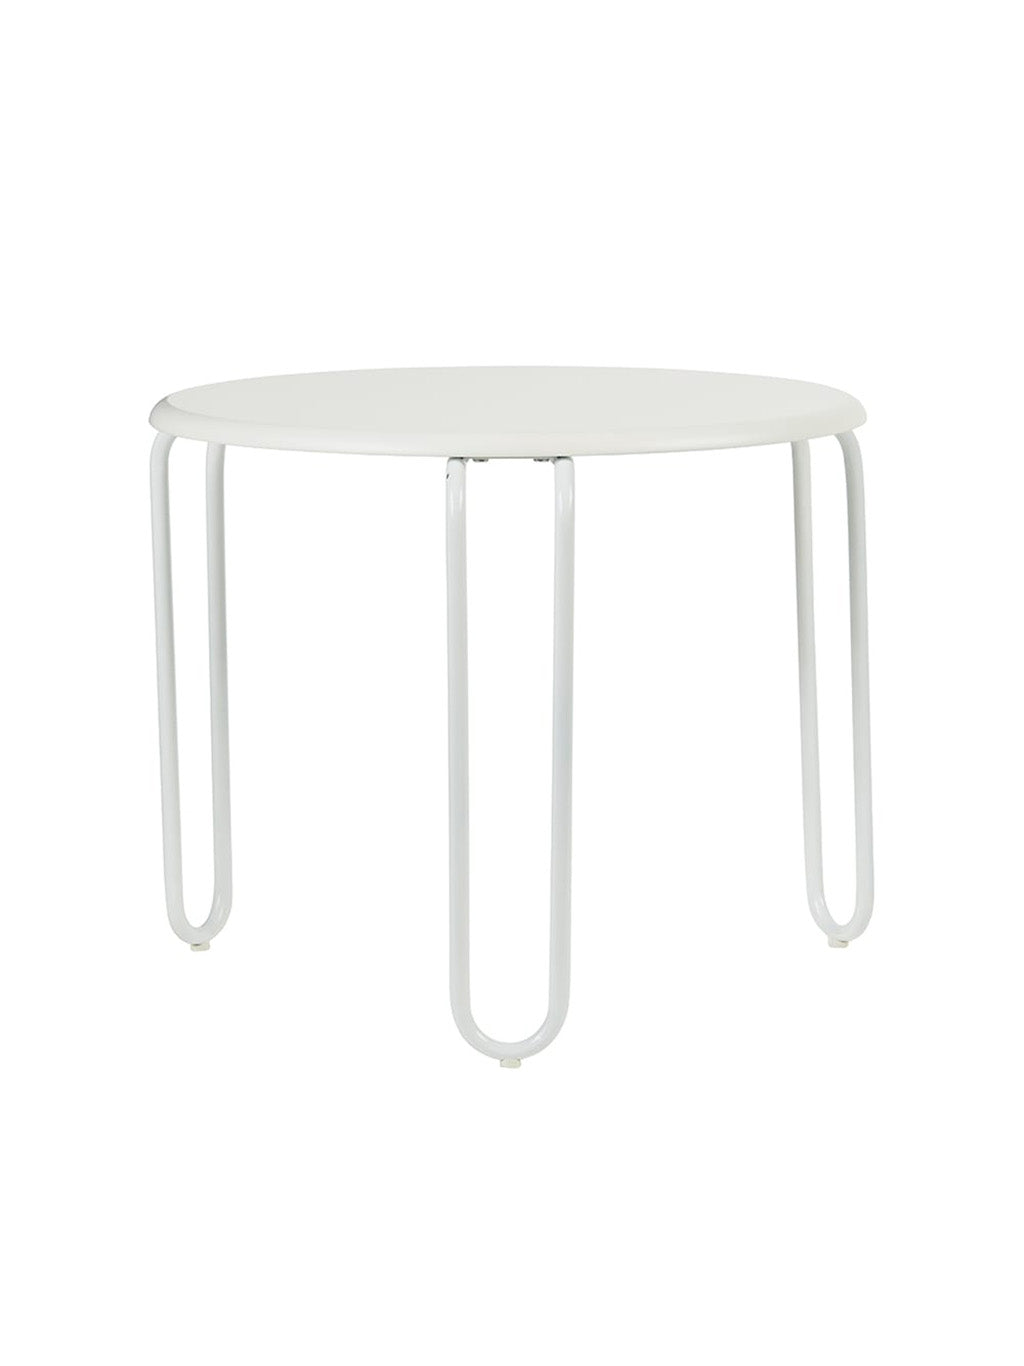 Kids-Concept-Table-White